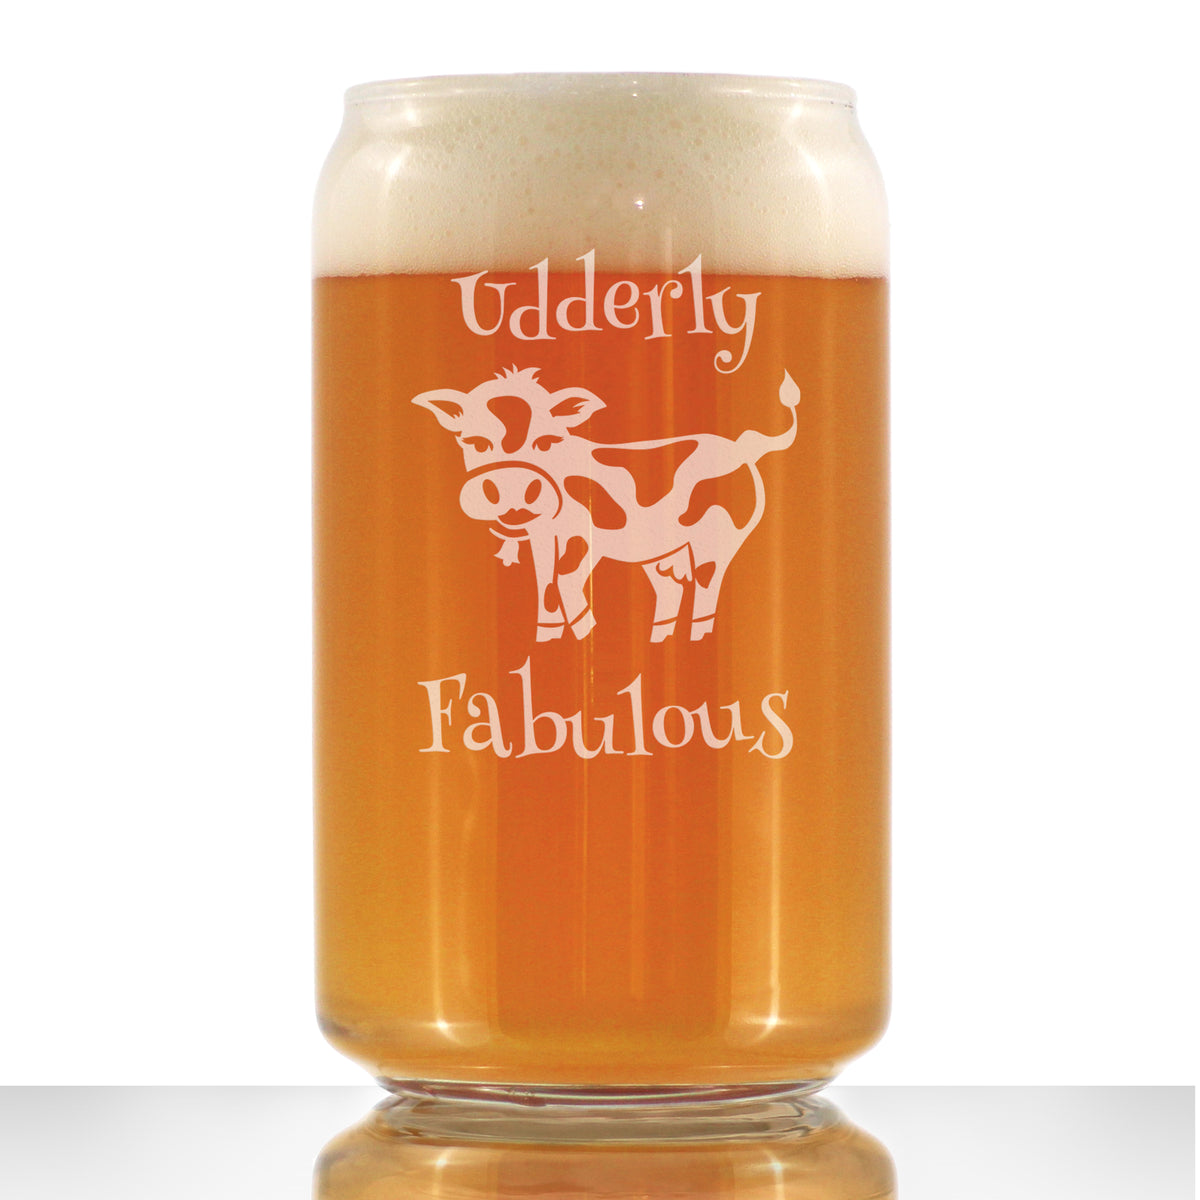 Udderly Fabulous - Beer Can Pint Glass - Funny Cow Gifts for Men &amp; Women - Fun Cow Themed Décor - 16 oz